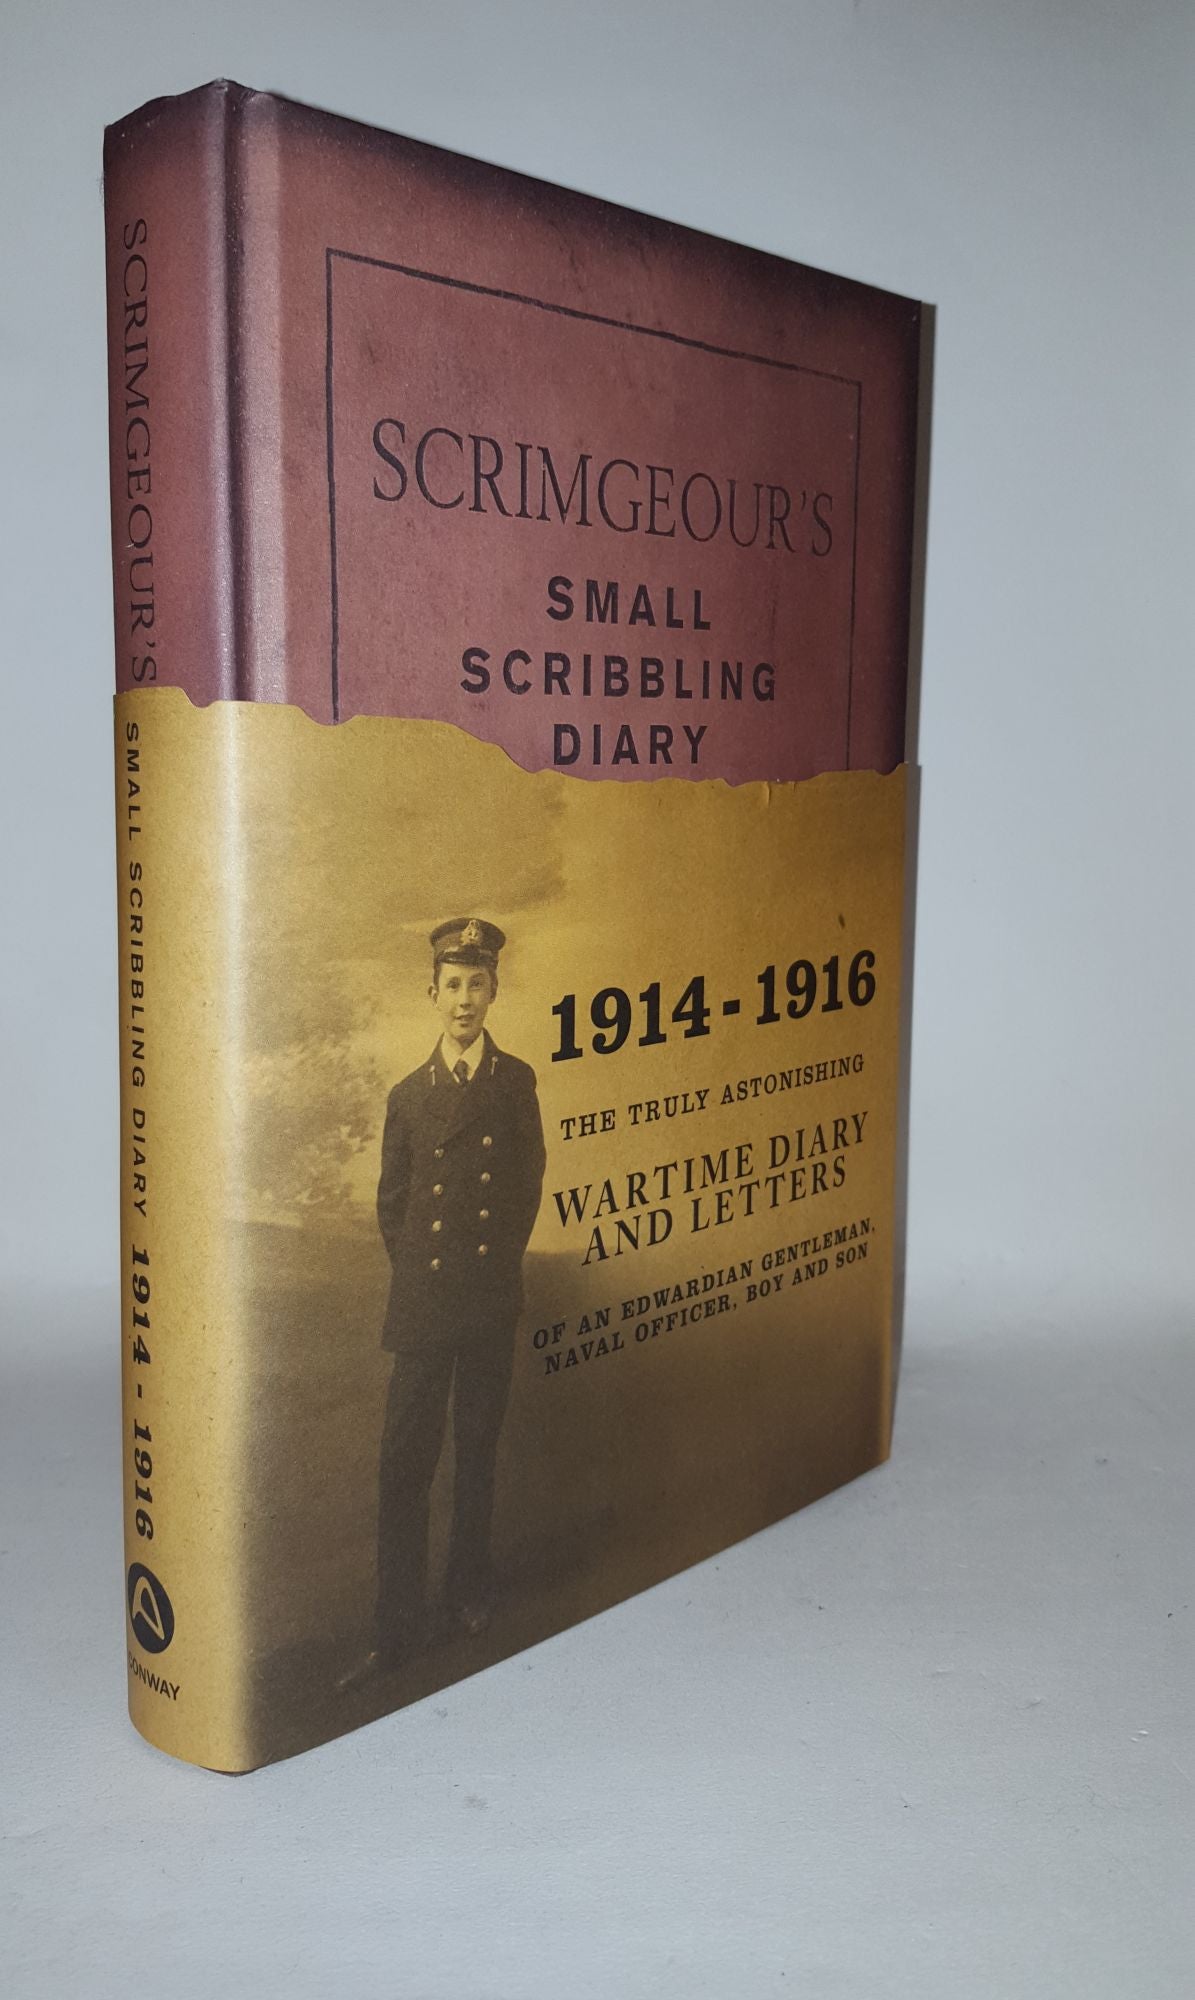 SCRIMGEOUR Alexander - Scrimgeour's Small Scribbling Diary 1914 - 1916 the Truly Astonishing Wartime Diary and Letters of an Edwardian Gentleman Naval Officer, Boy and Son